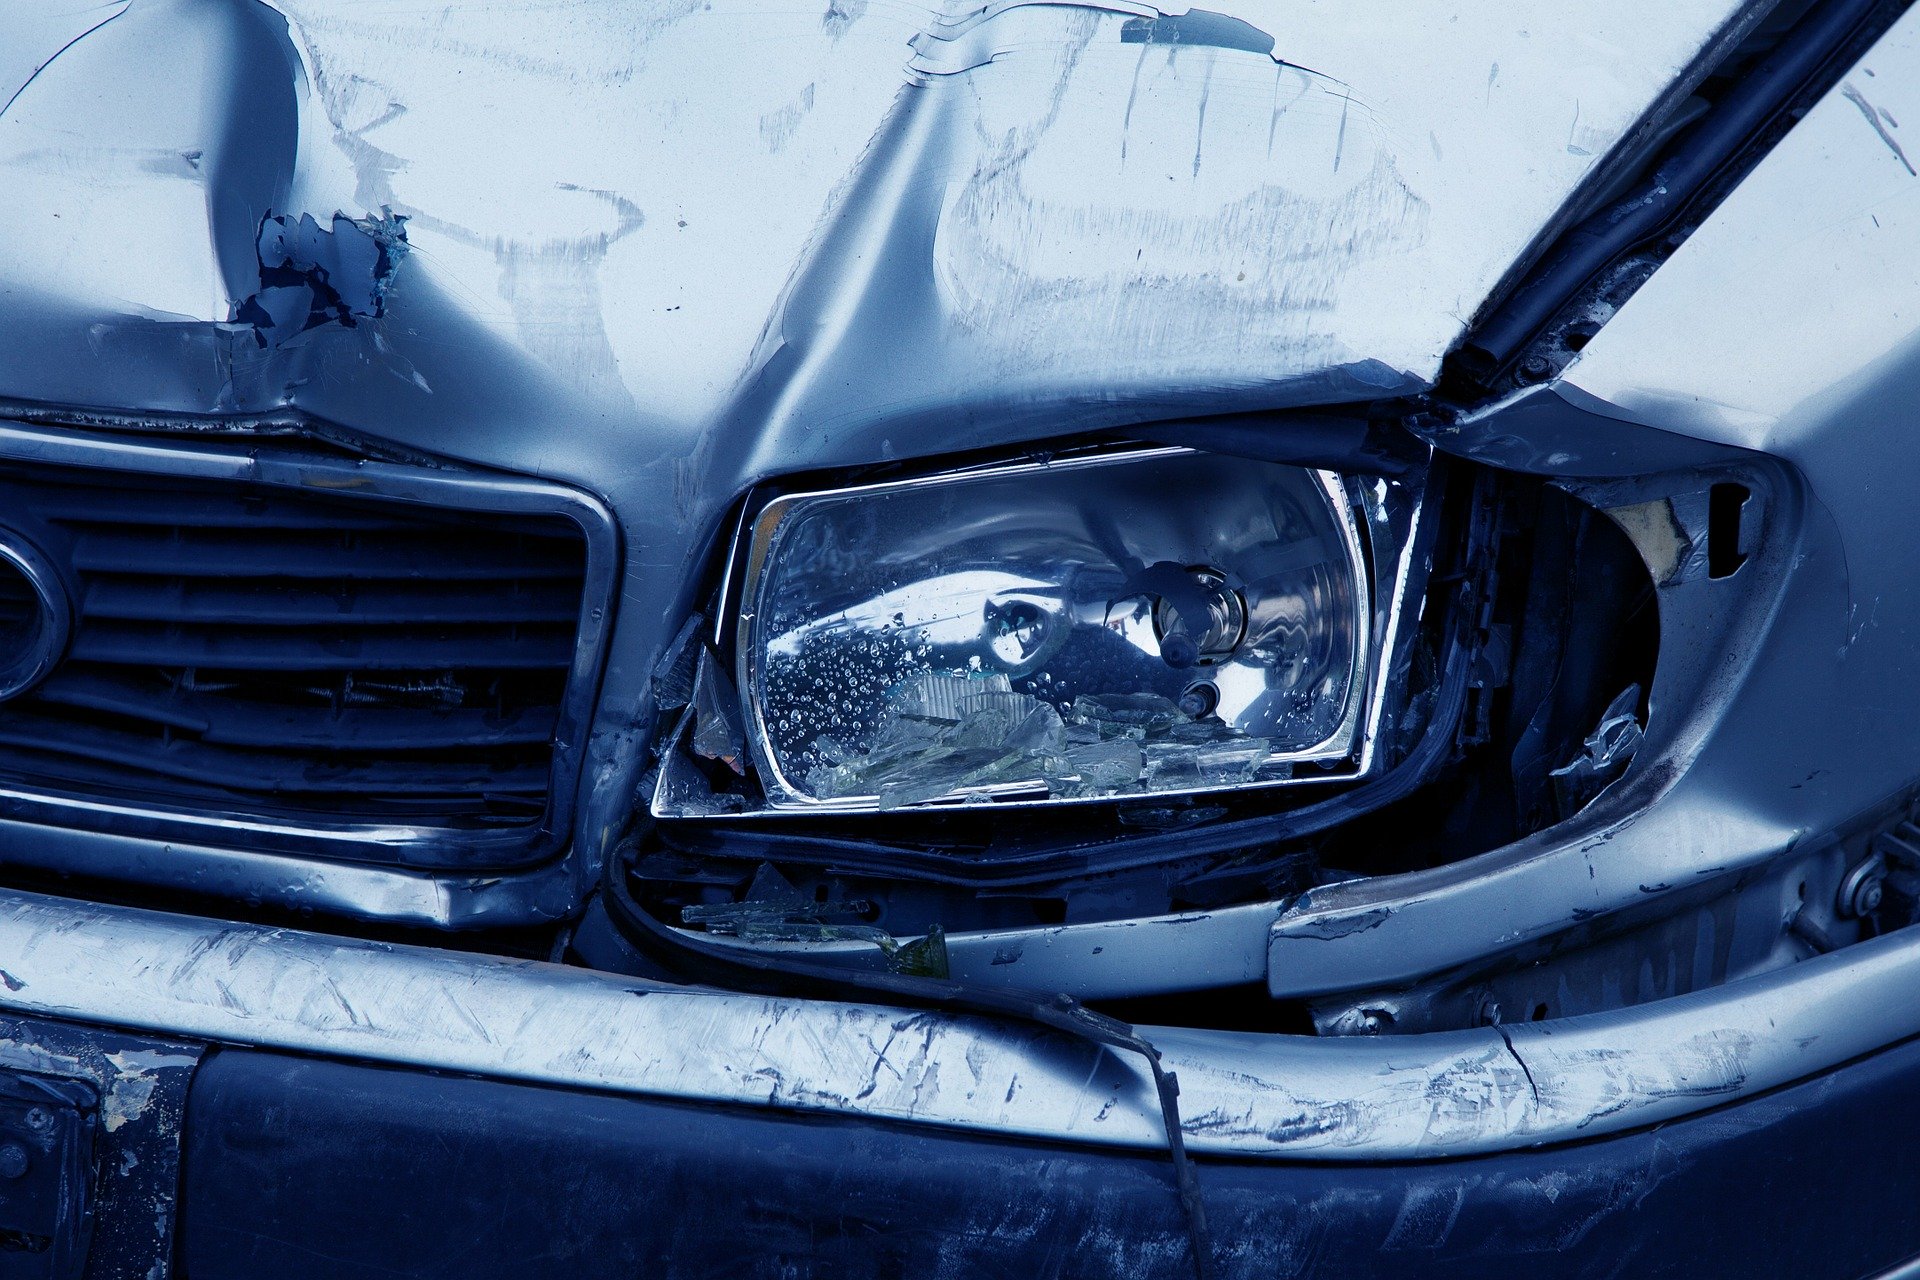 A blue car wrecked from a car accident